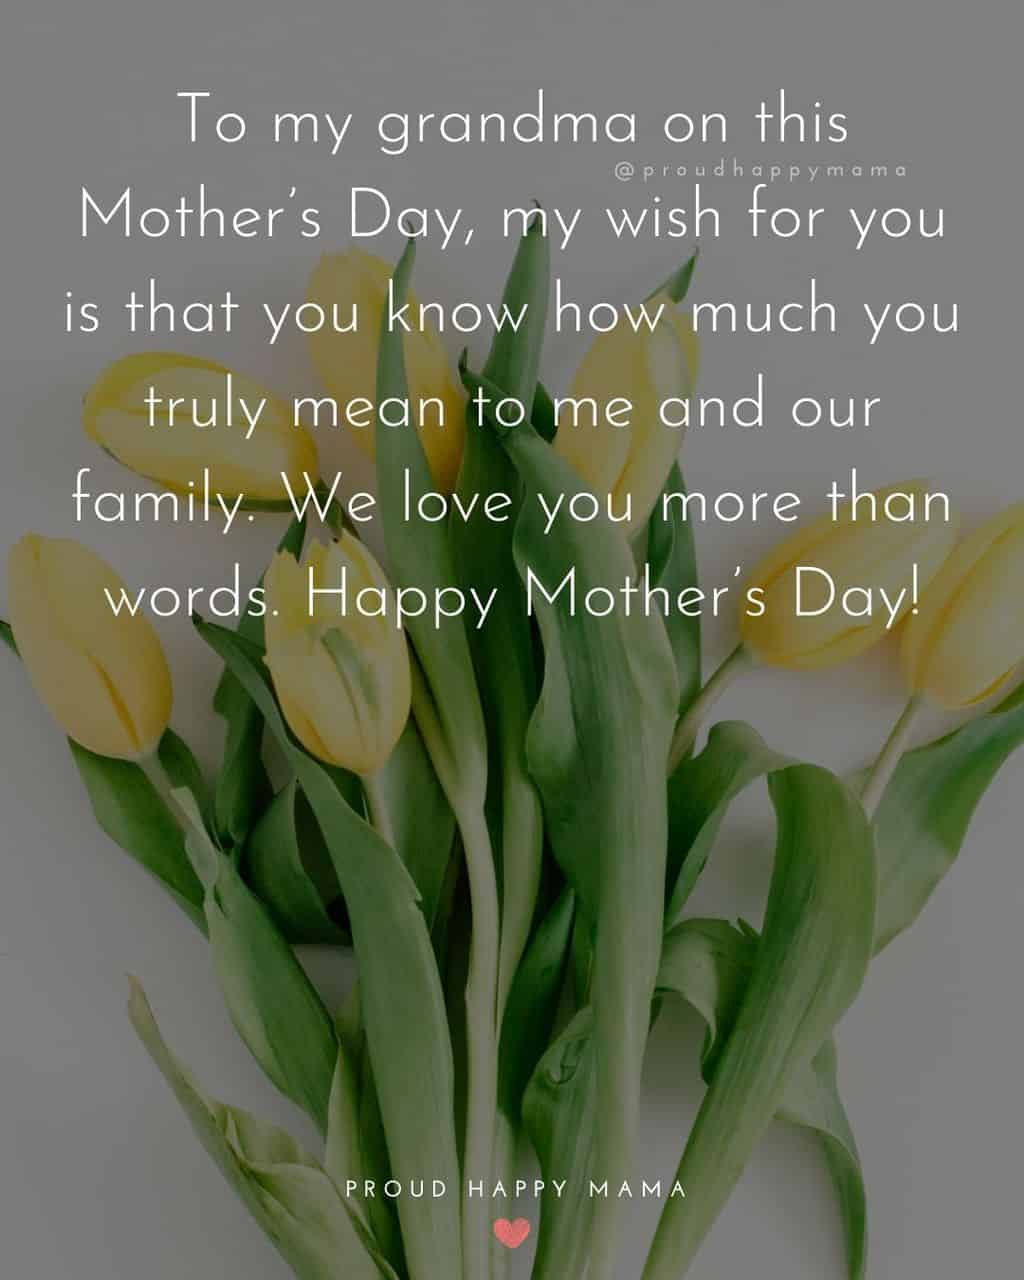 Happy Mothers Day Quotes To Grandma - To my grandma on this Mother’s Day, my wish for you is that you know how much